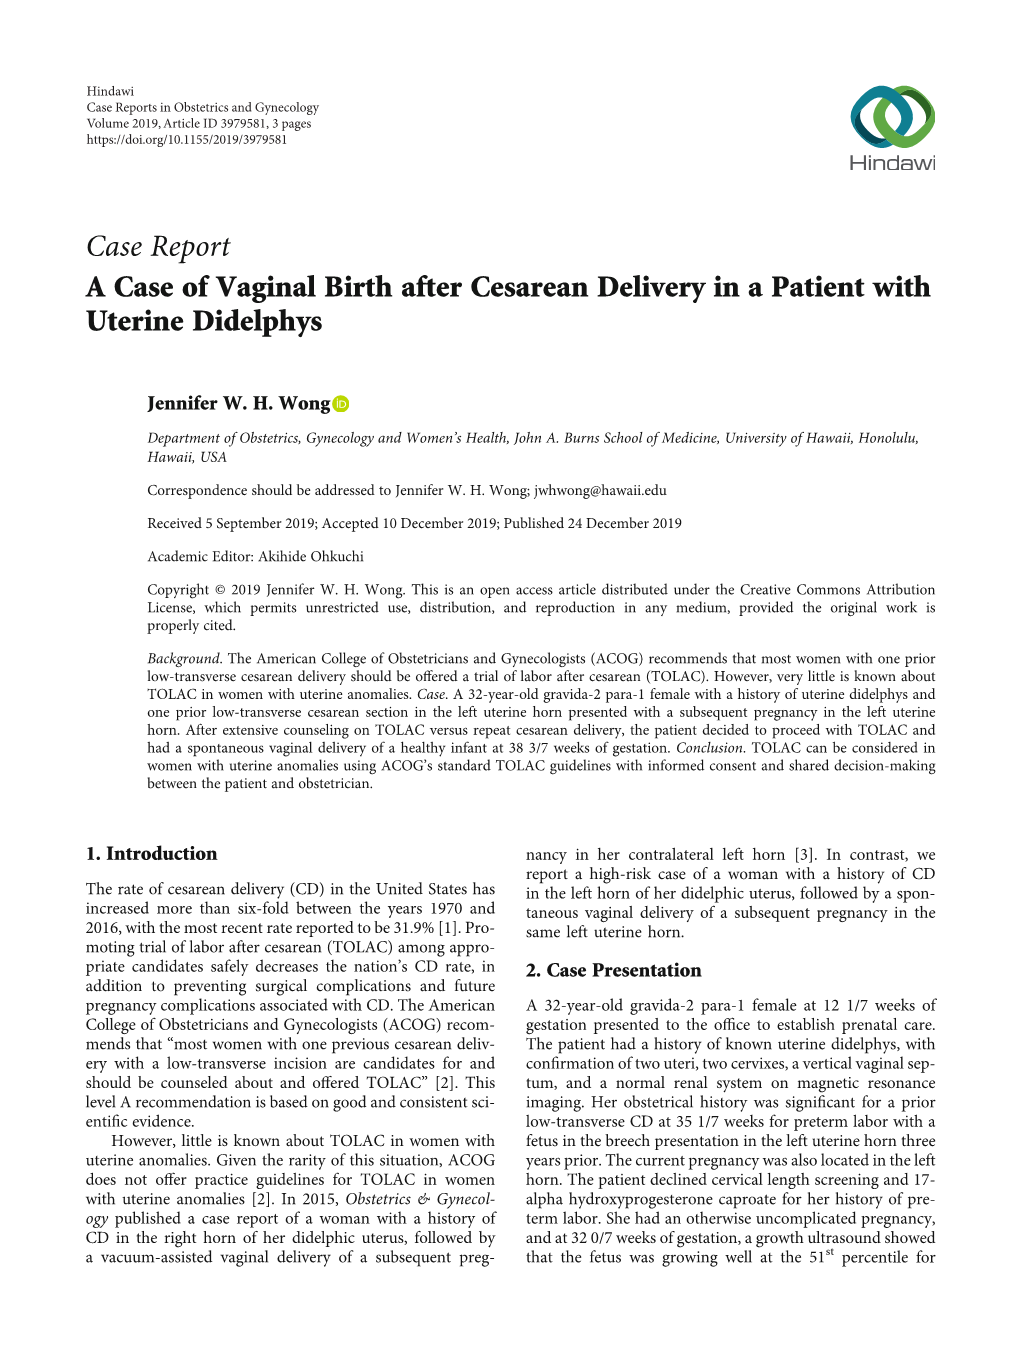 Case Report a Case of Vaginal Birth After Cesarean Delivery in a Patient with Uterine Didelphys